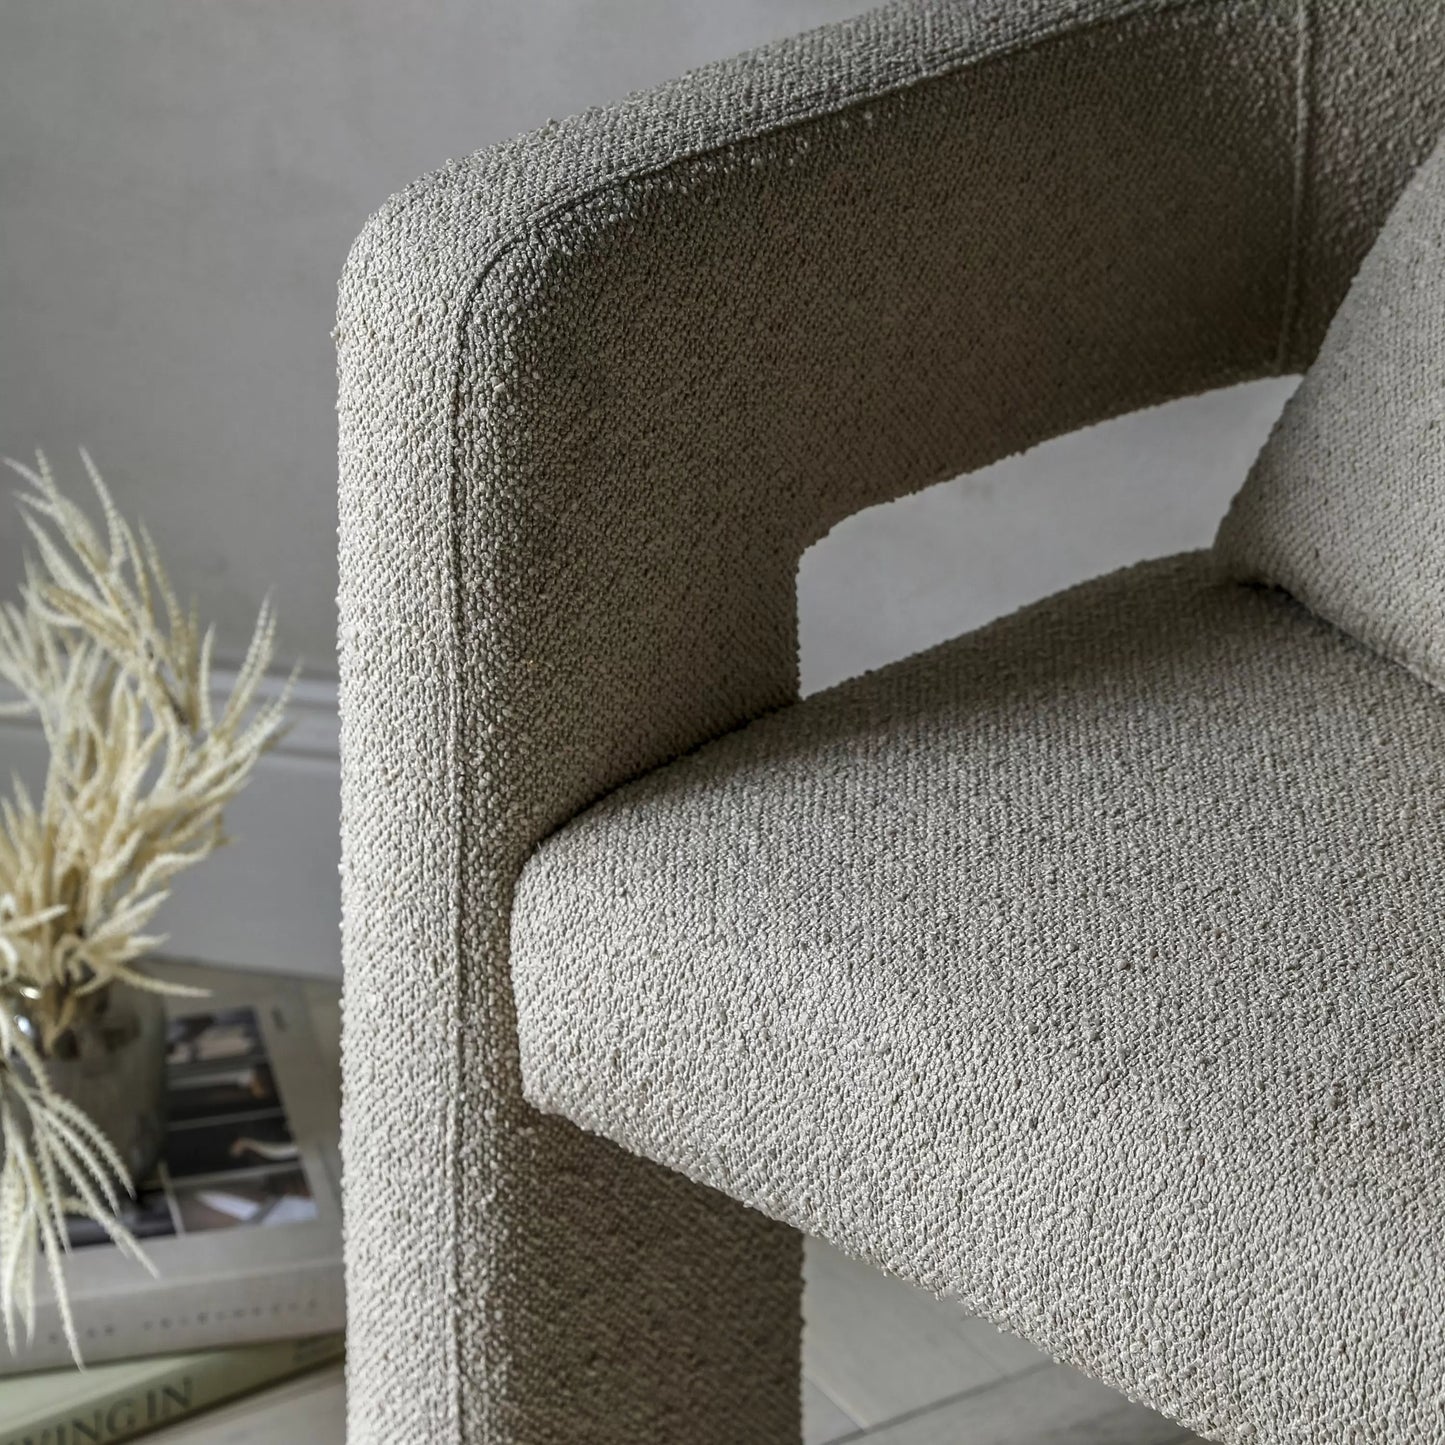 Cleo Armchair in Taupe